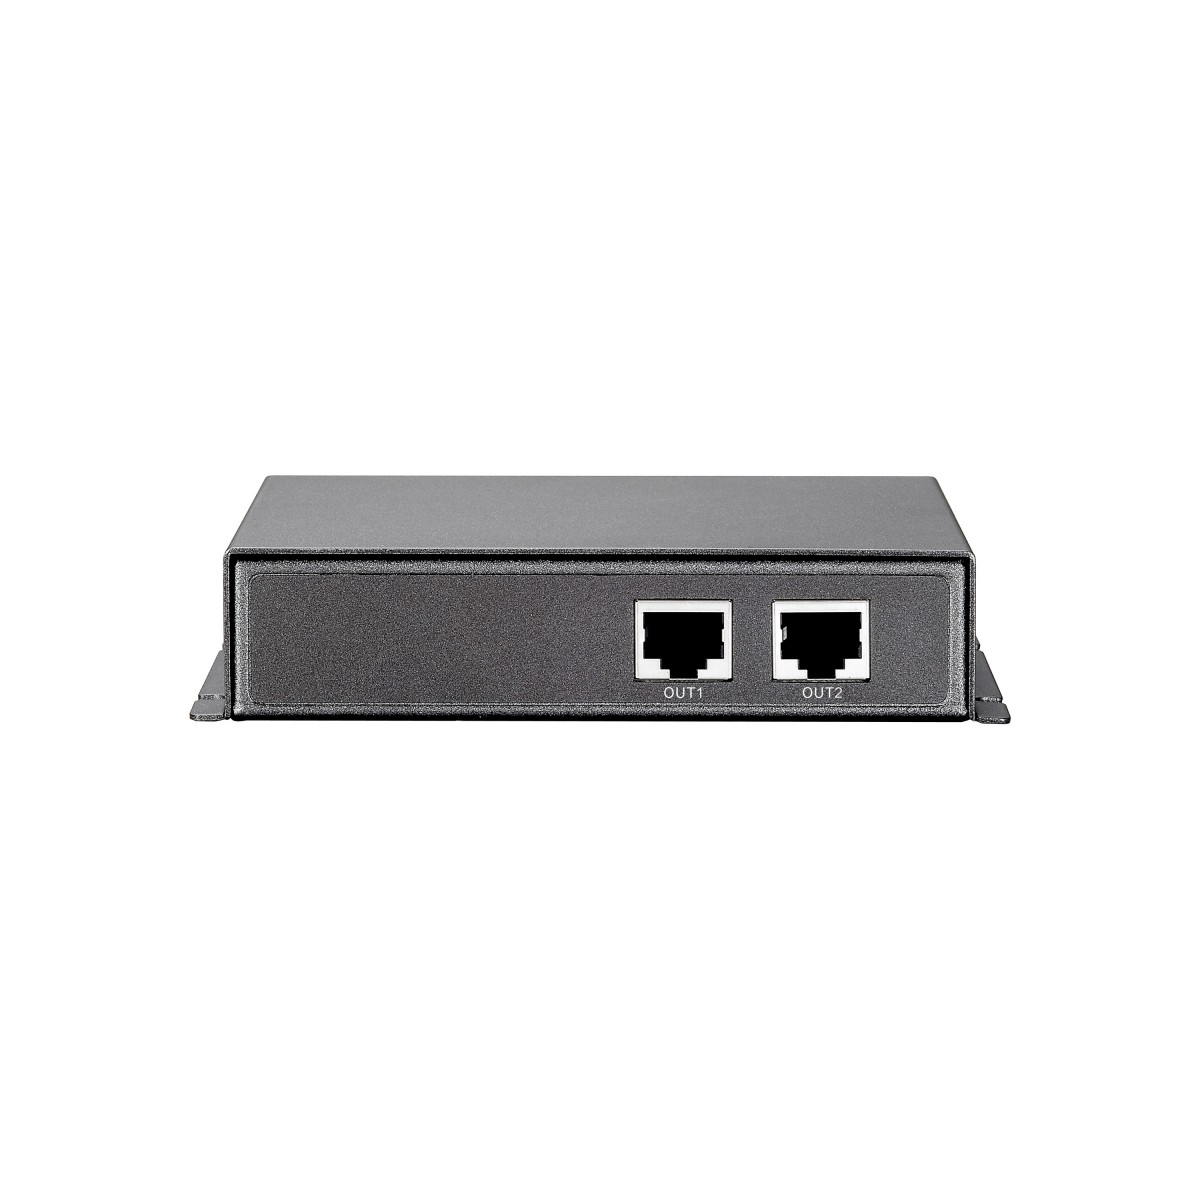 LevelOne Gigabit PoE Repeater - Cascadable - 2 PoE Outputs - Network repeater - 100 m - 1000 Mbit/s - 10/100/1000Base-T(X) - IEE